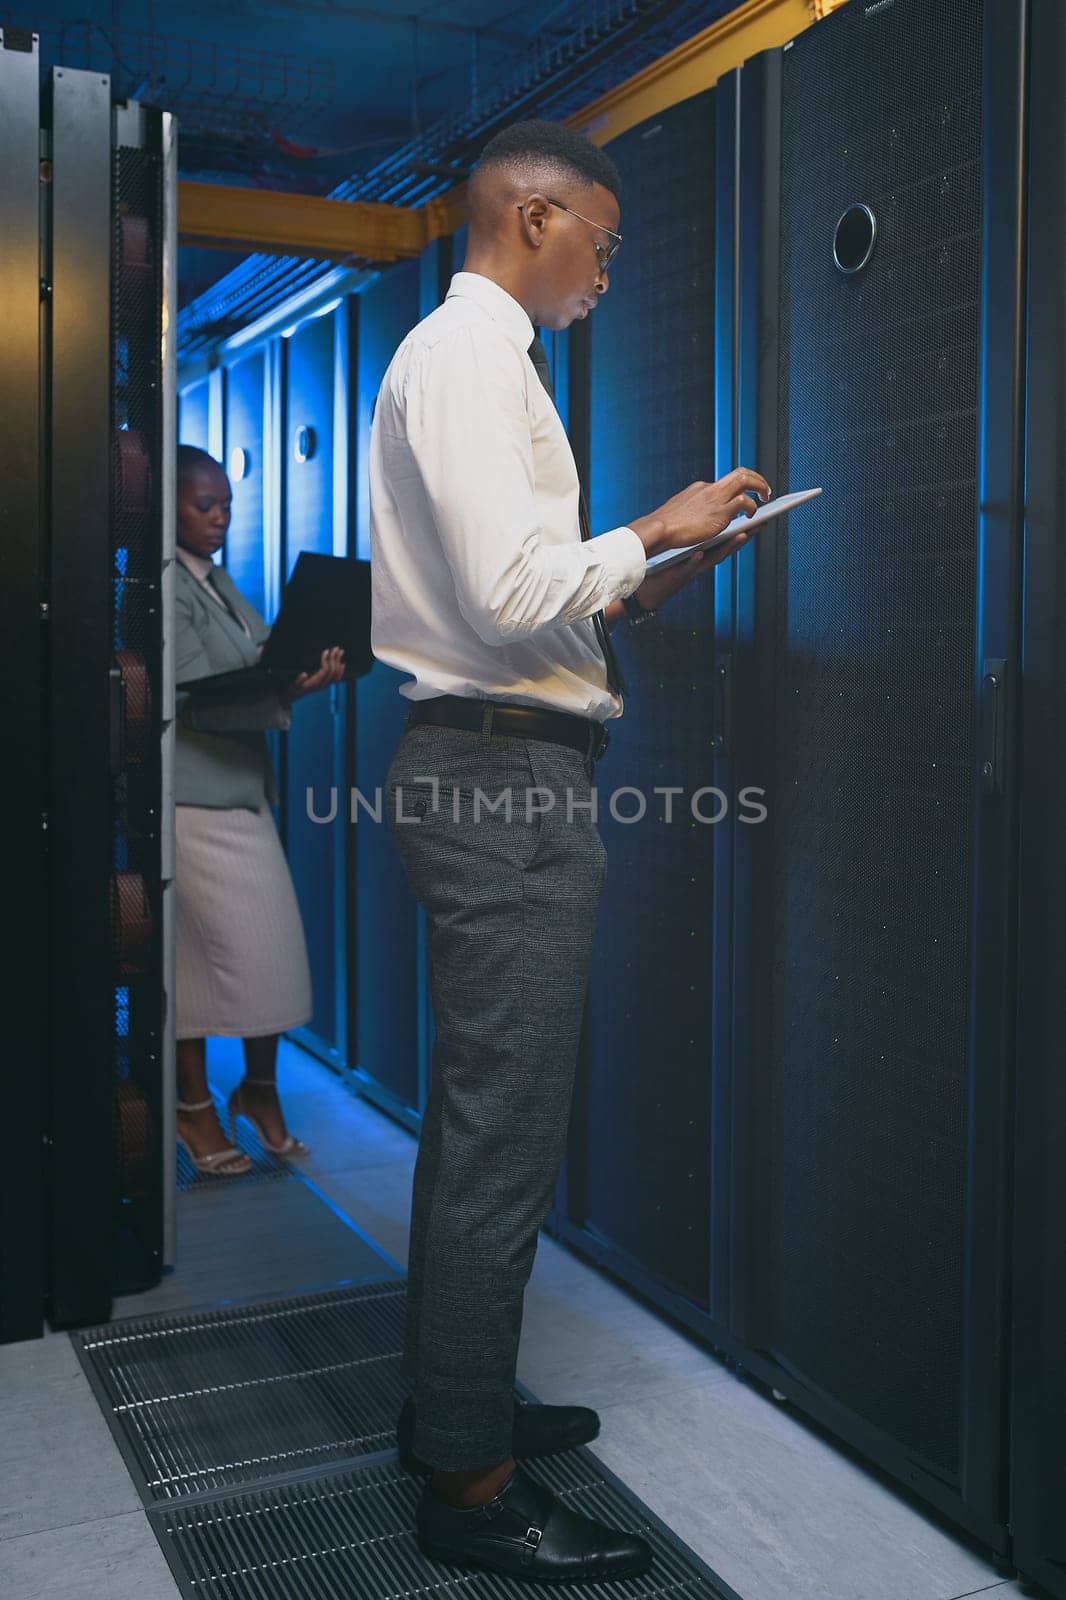 Strengthening the firewall. two young IT specialists standing together in the server room and using technology